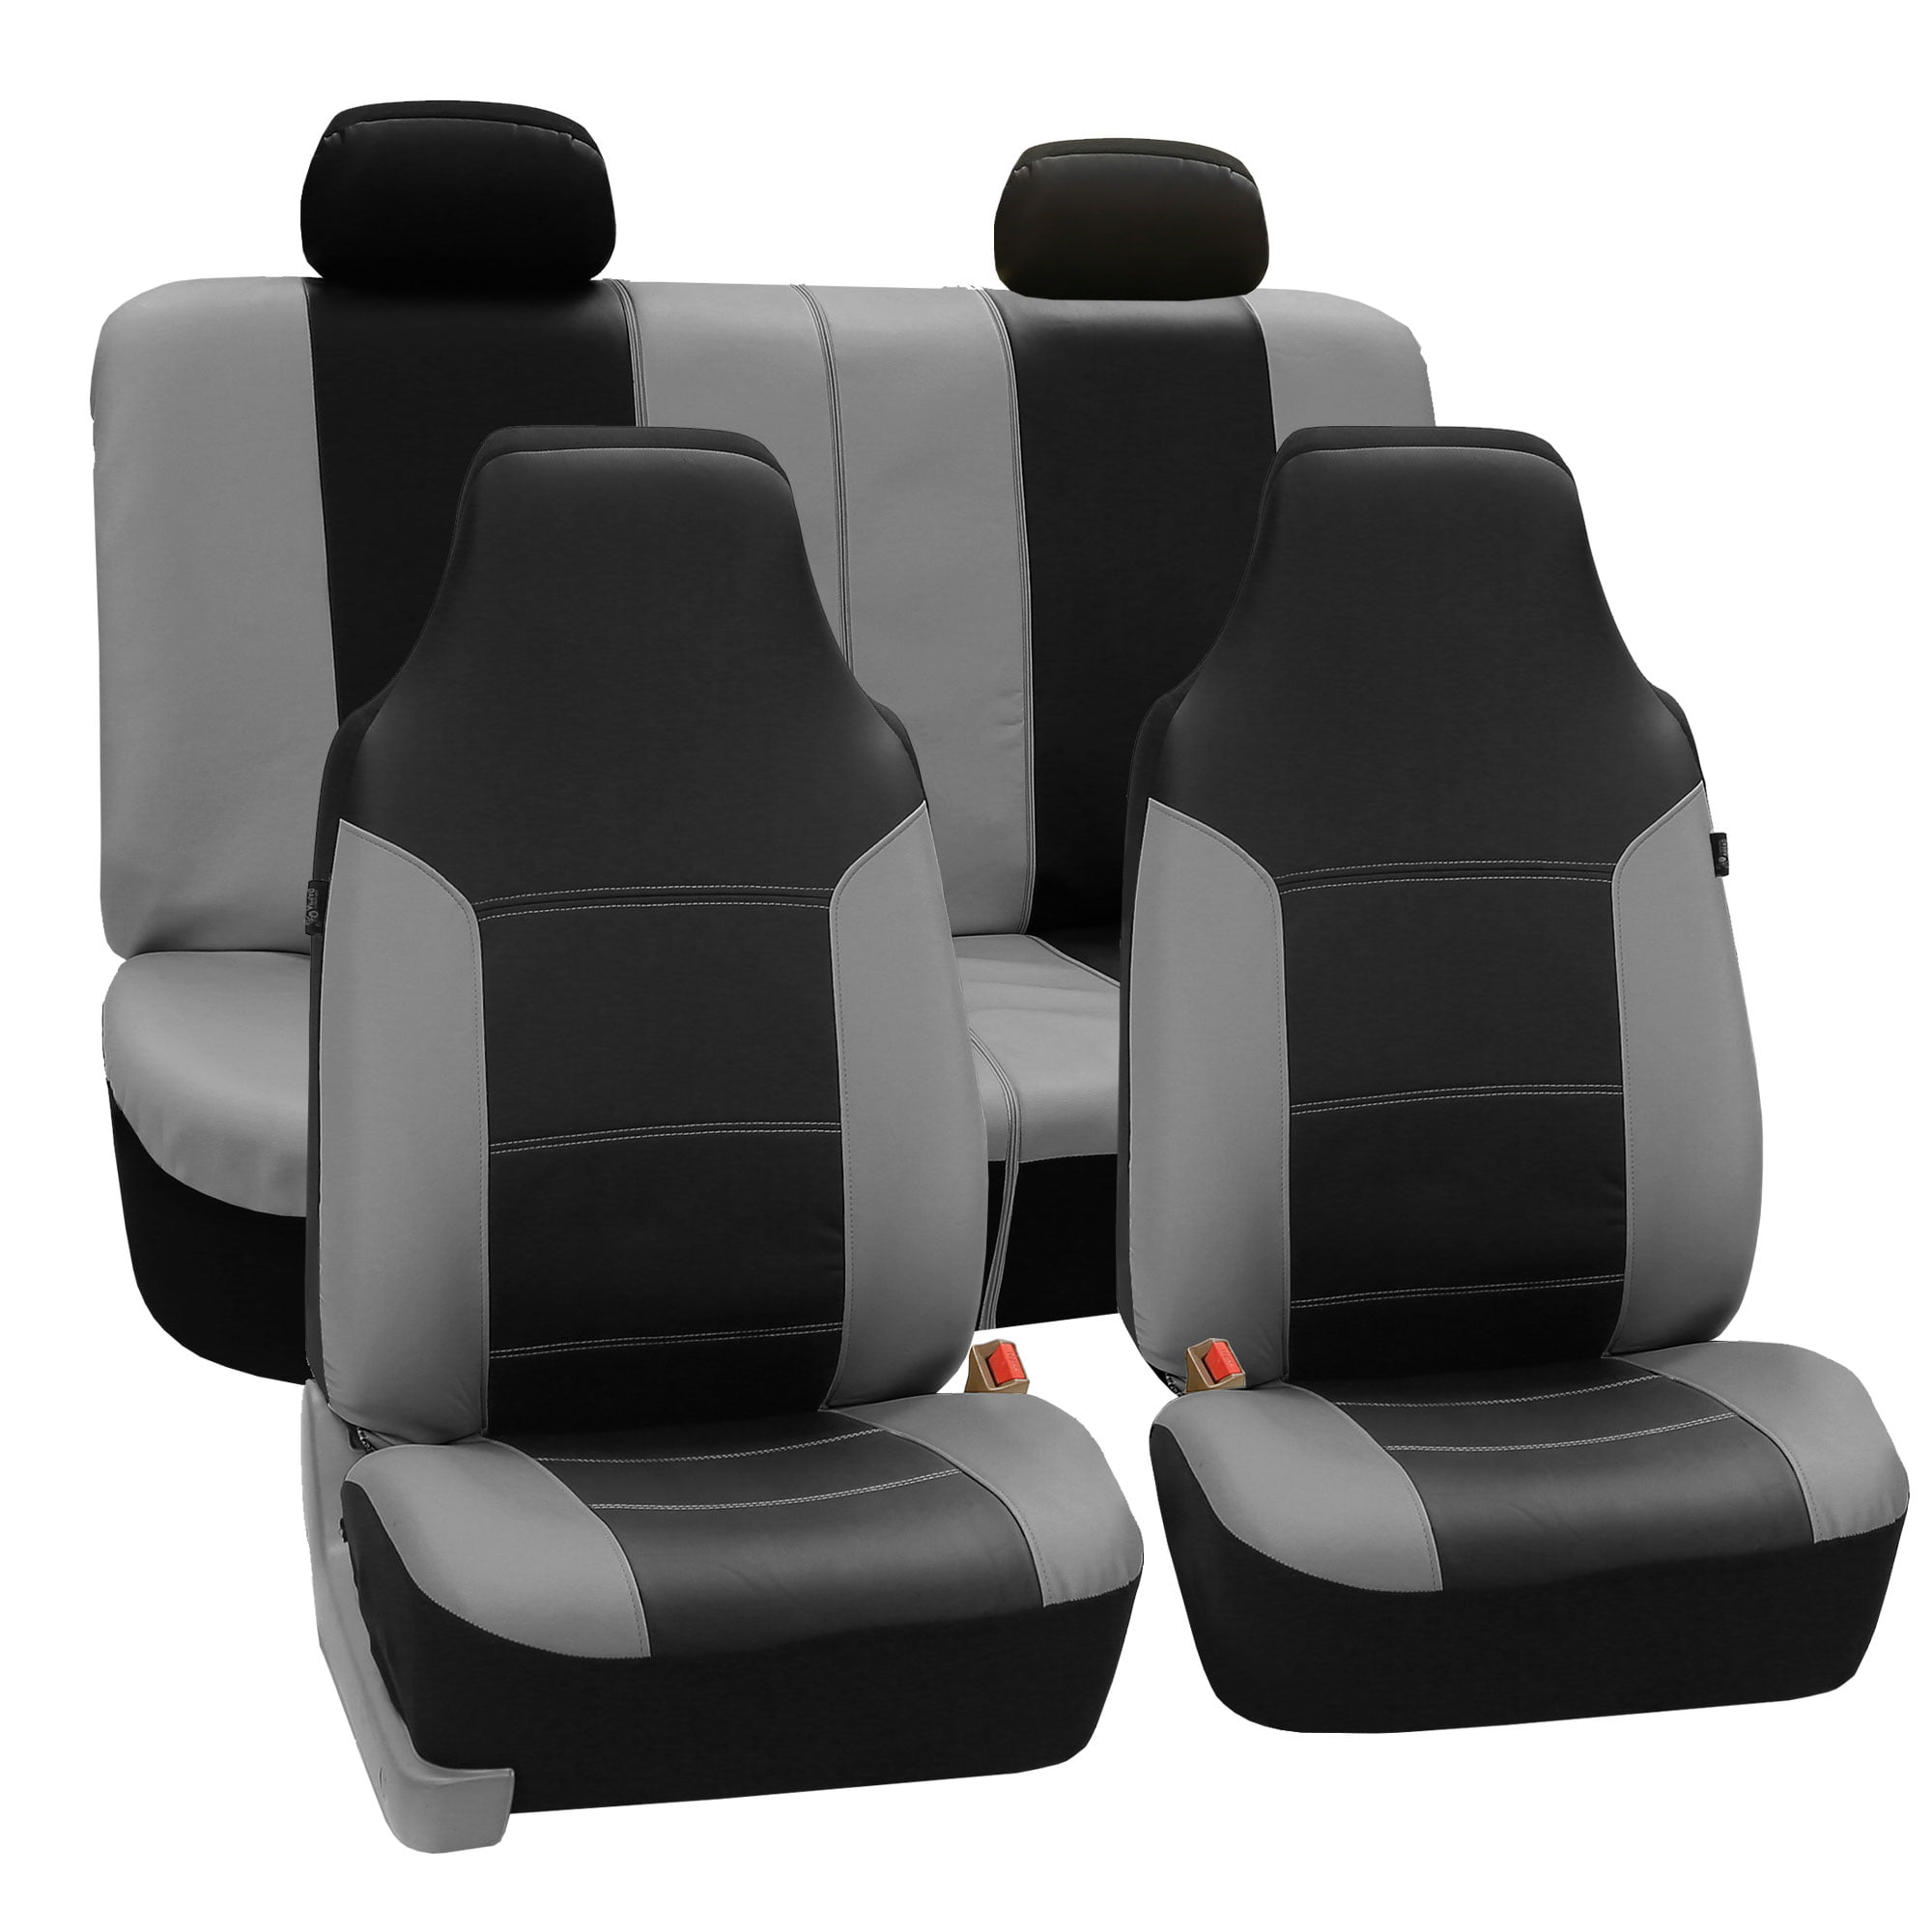 Verdorie huichelarij toezicht houden op FH Group Royal PU Leather Full Set Airbag Compatible and Split Bench Car  Seat Covers, Gray and Black - Walmart.com